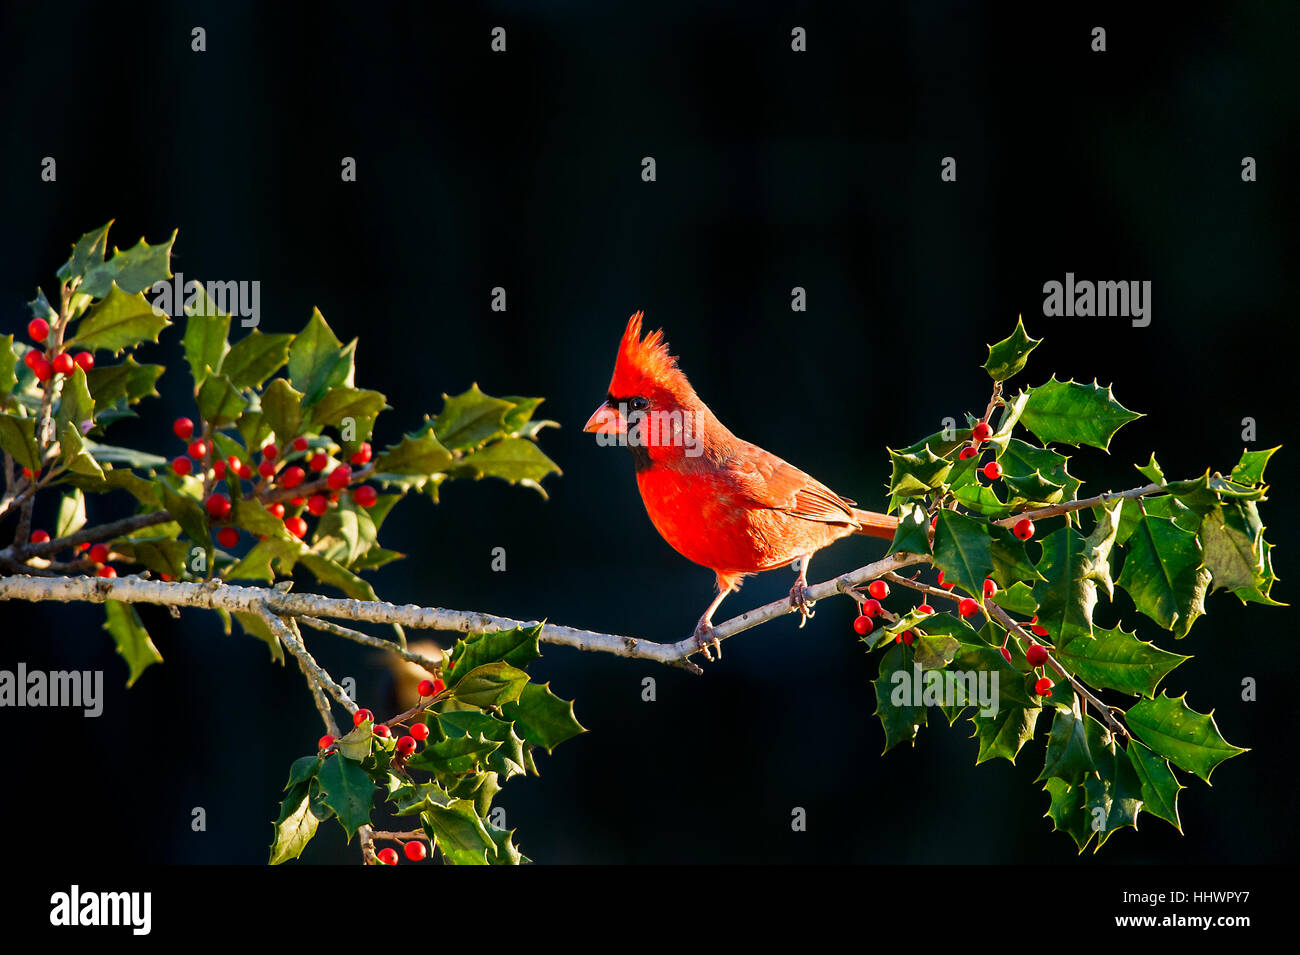 A bright red male Northern Cardinal perches on a branch of Holly with red berries against a solid black background. Stock Photo